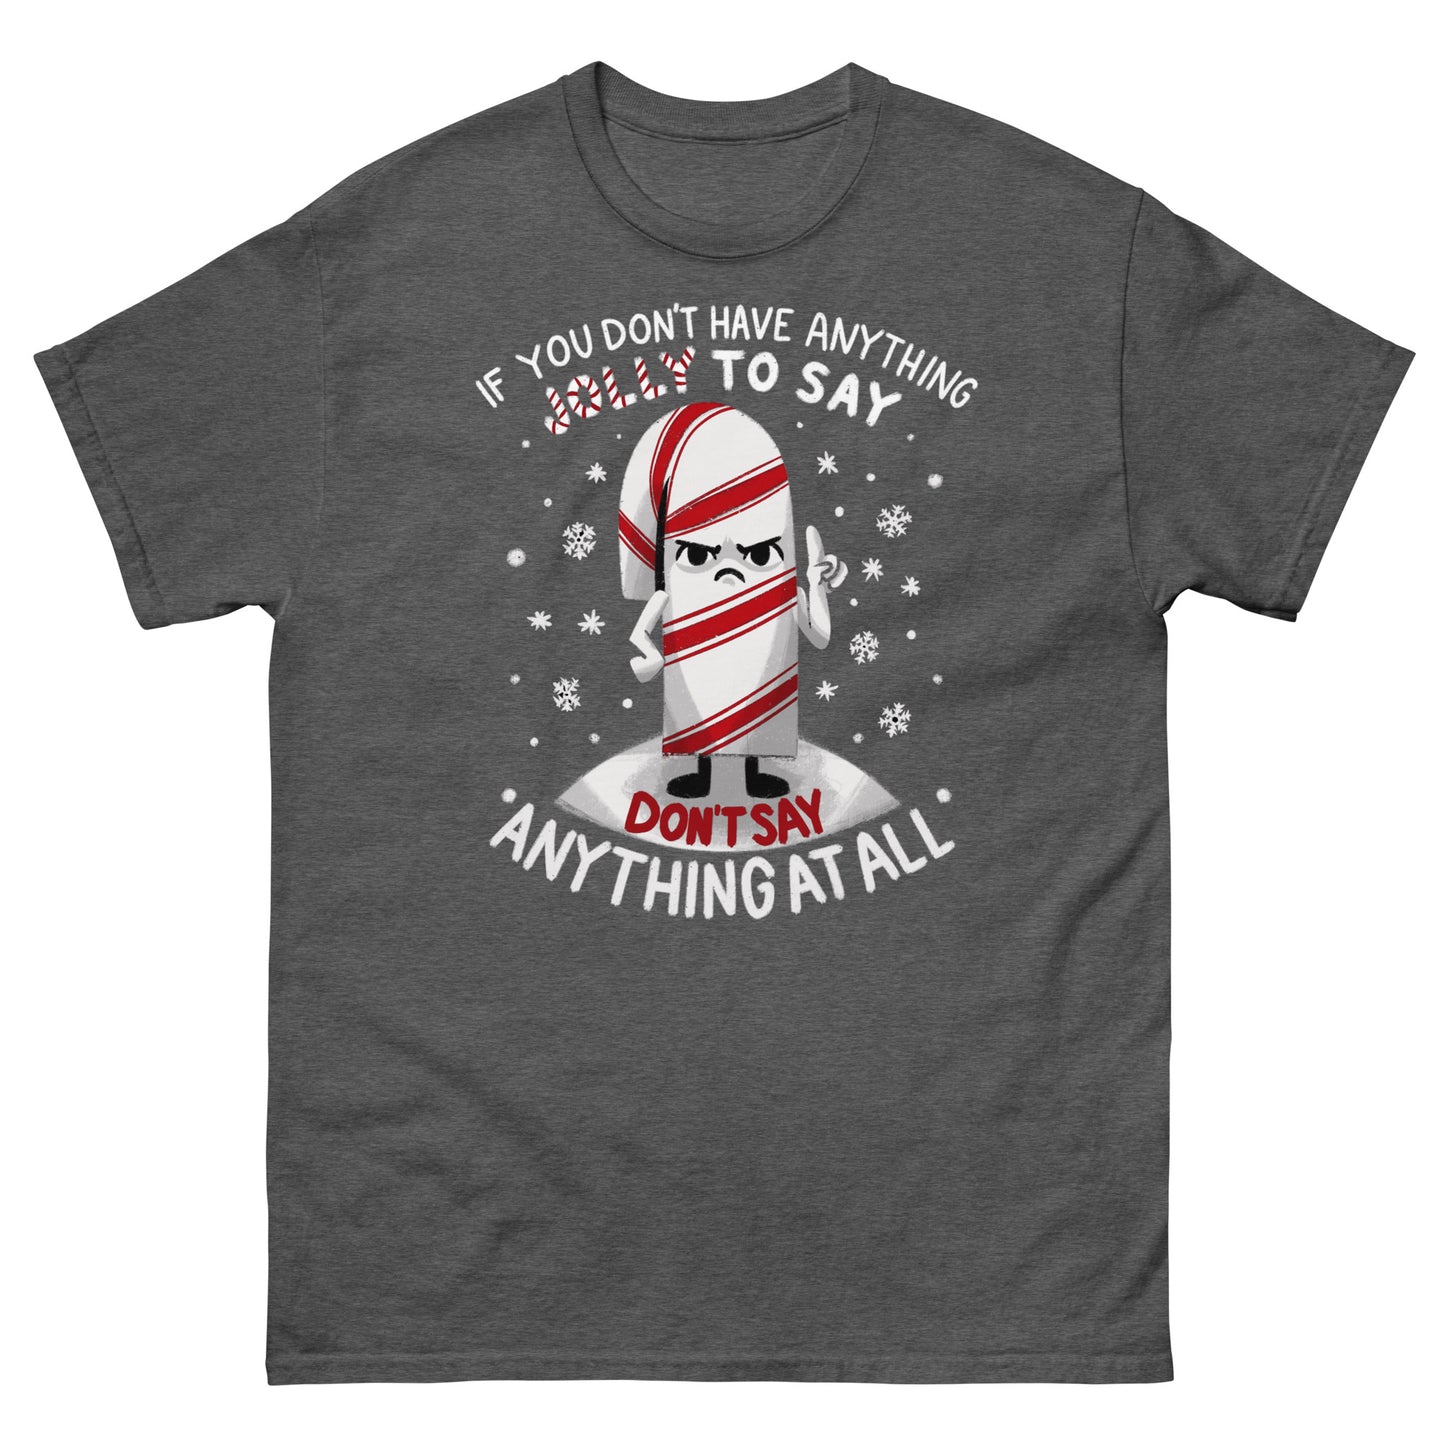 If You Don't Have Anything Nice To Say - Funny Christmas T-Shirt